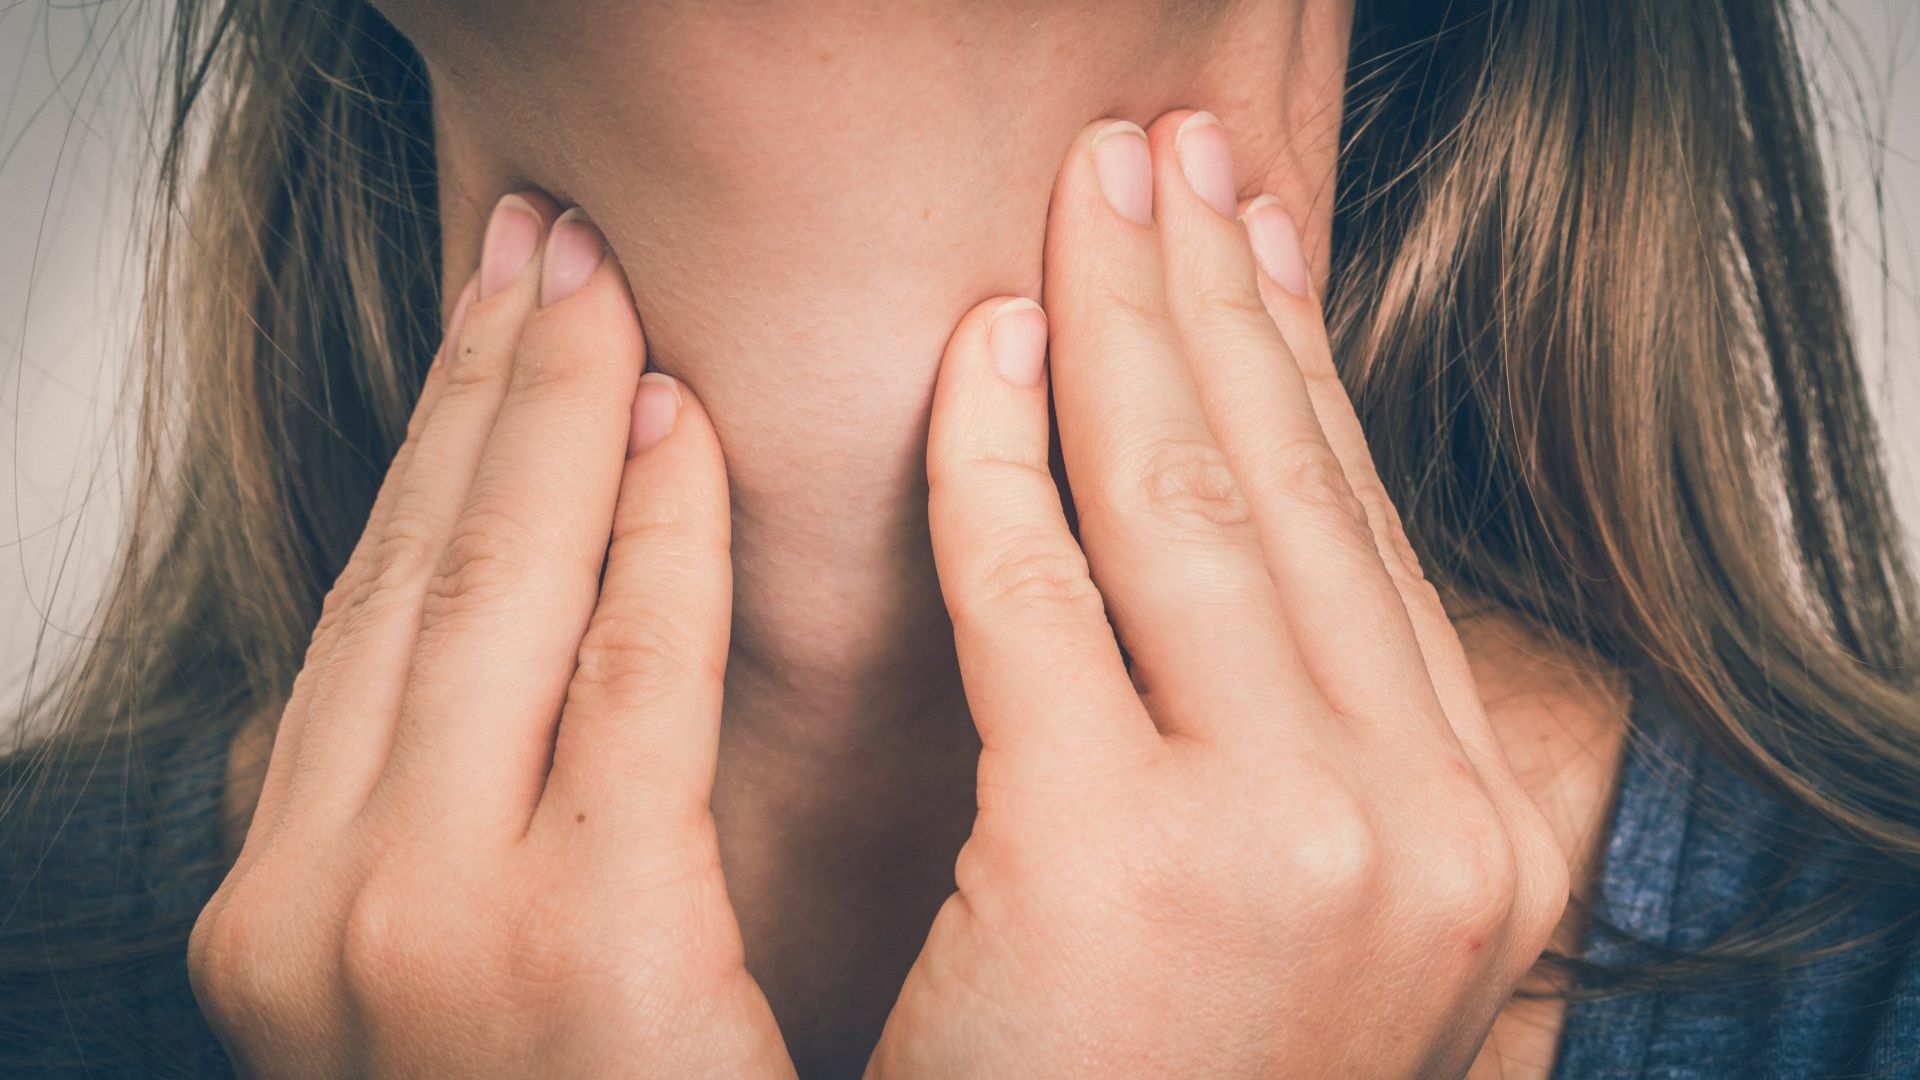 “I was diagnosed with a thyroid disorder at 19 – these are the red flags I wish I’d noticed earlier”